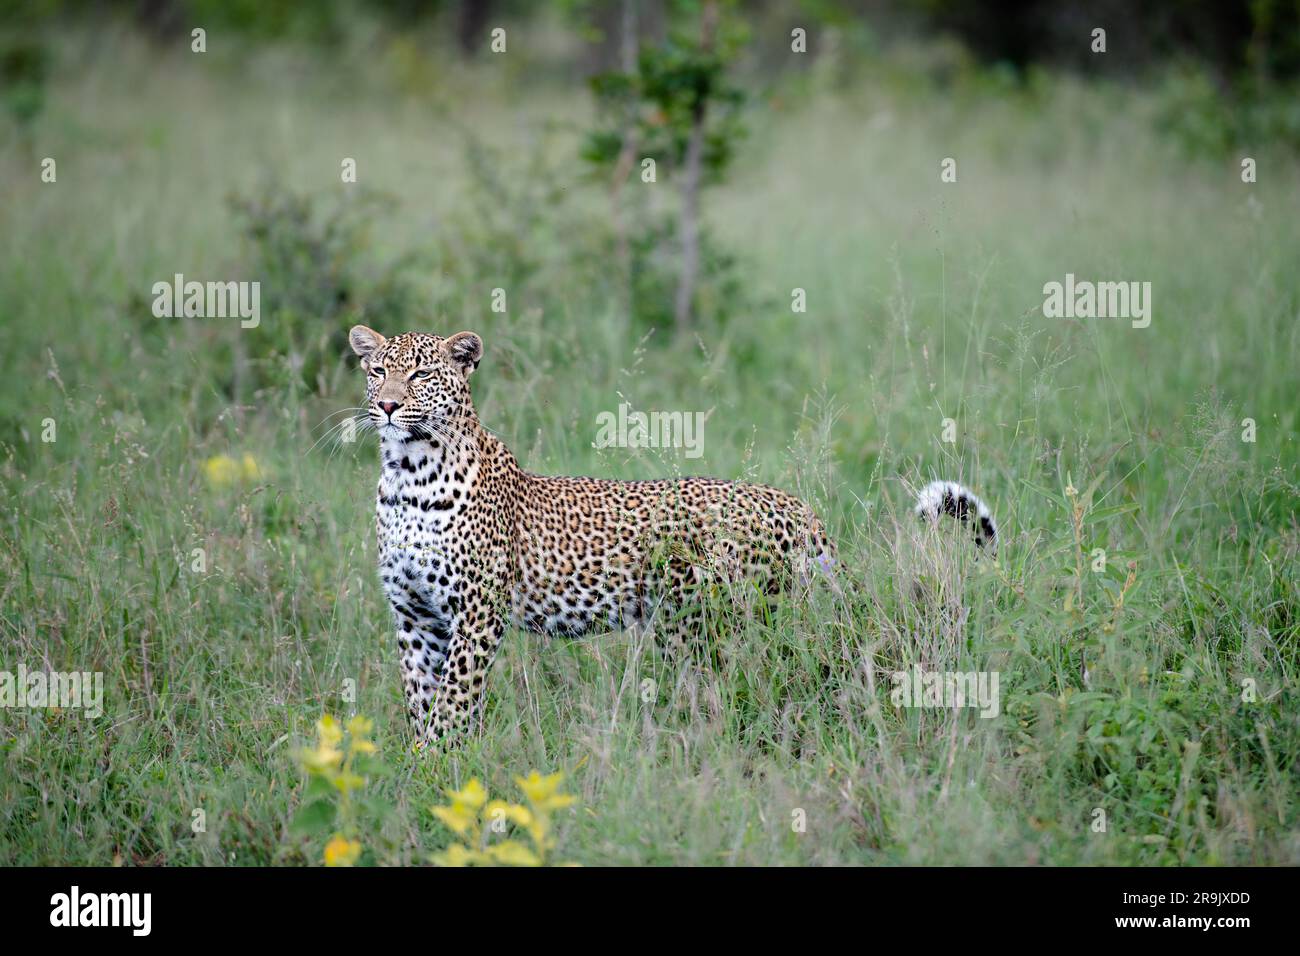 A female leopard, Panthera pardus, stands in tall grass, alert. Stock Photo